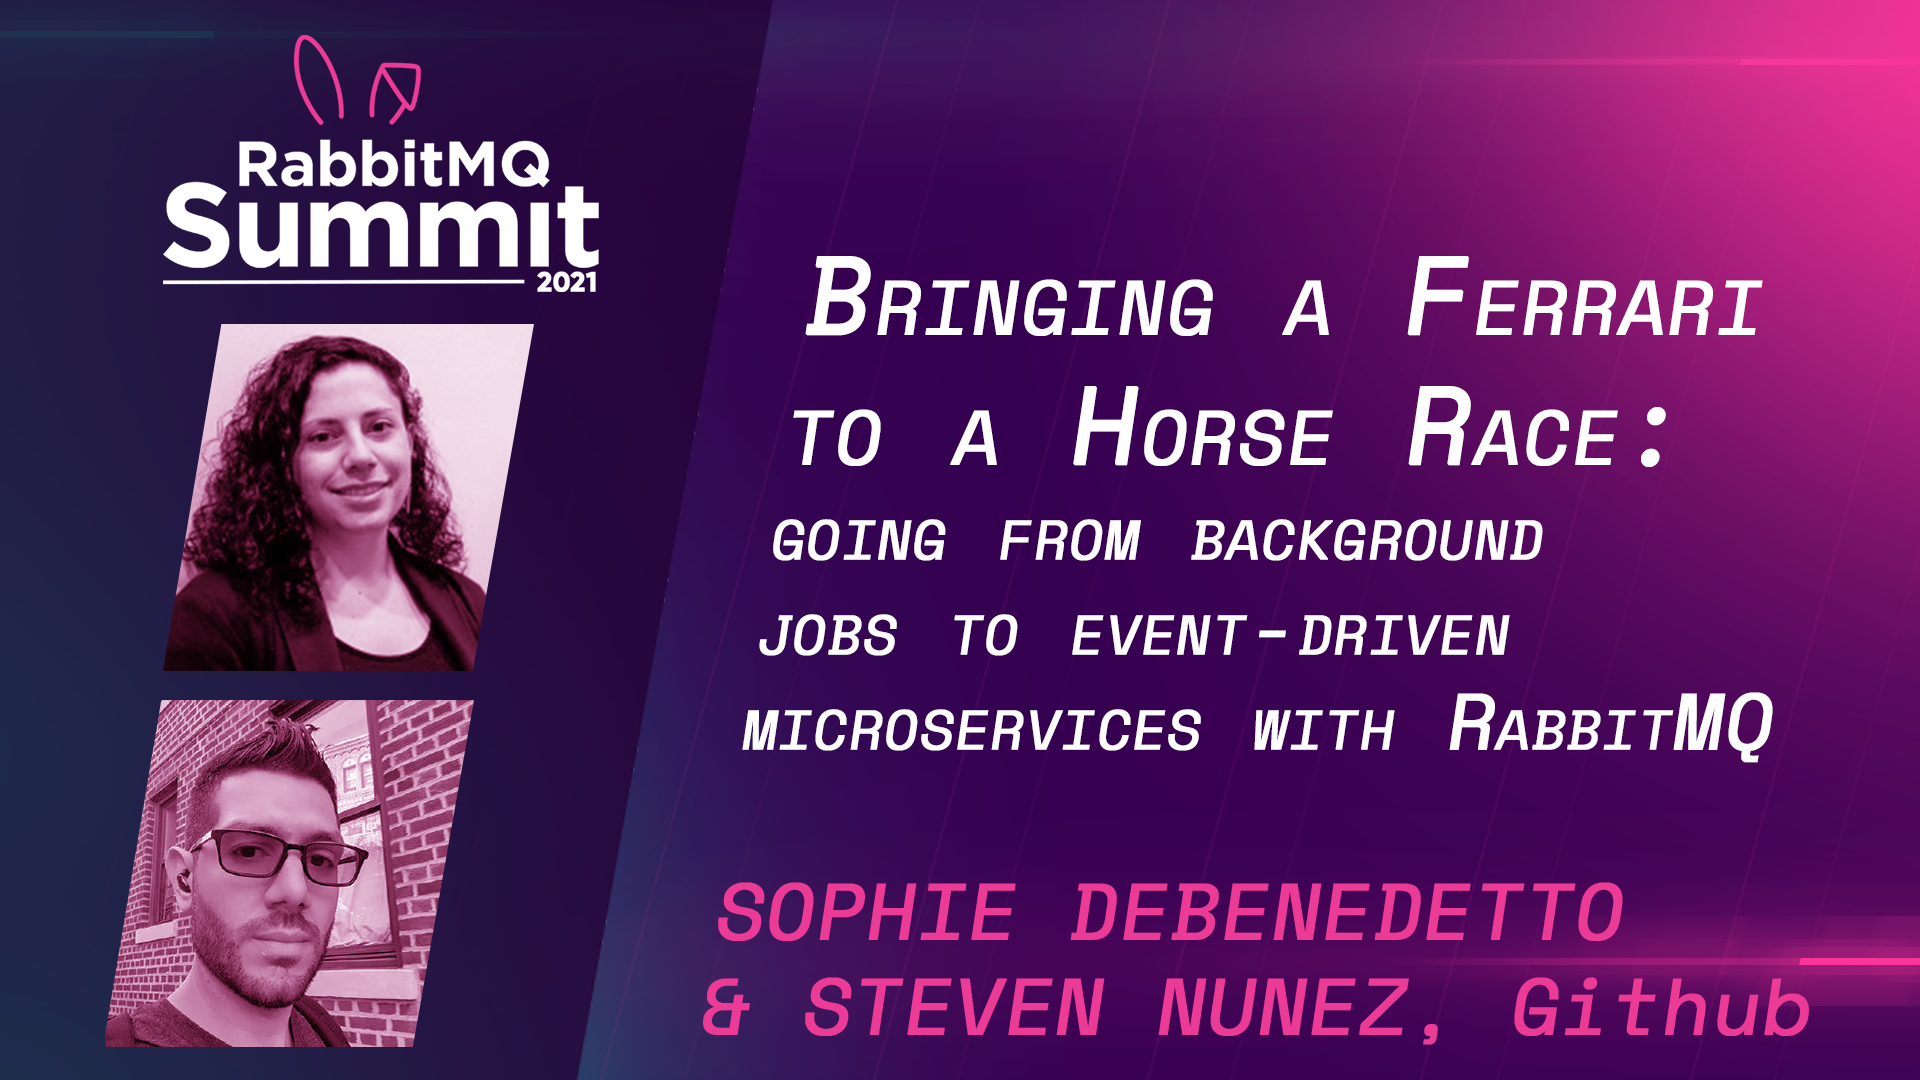 Keynote: Bringing a Ferrari to a Horse Race: Going From Background Jobs to Event-Driven Microservices with RabbitMQ - Sophie DeBenedetto & Steven Nunez